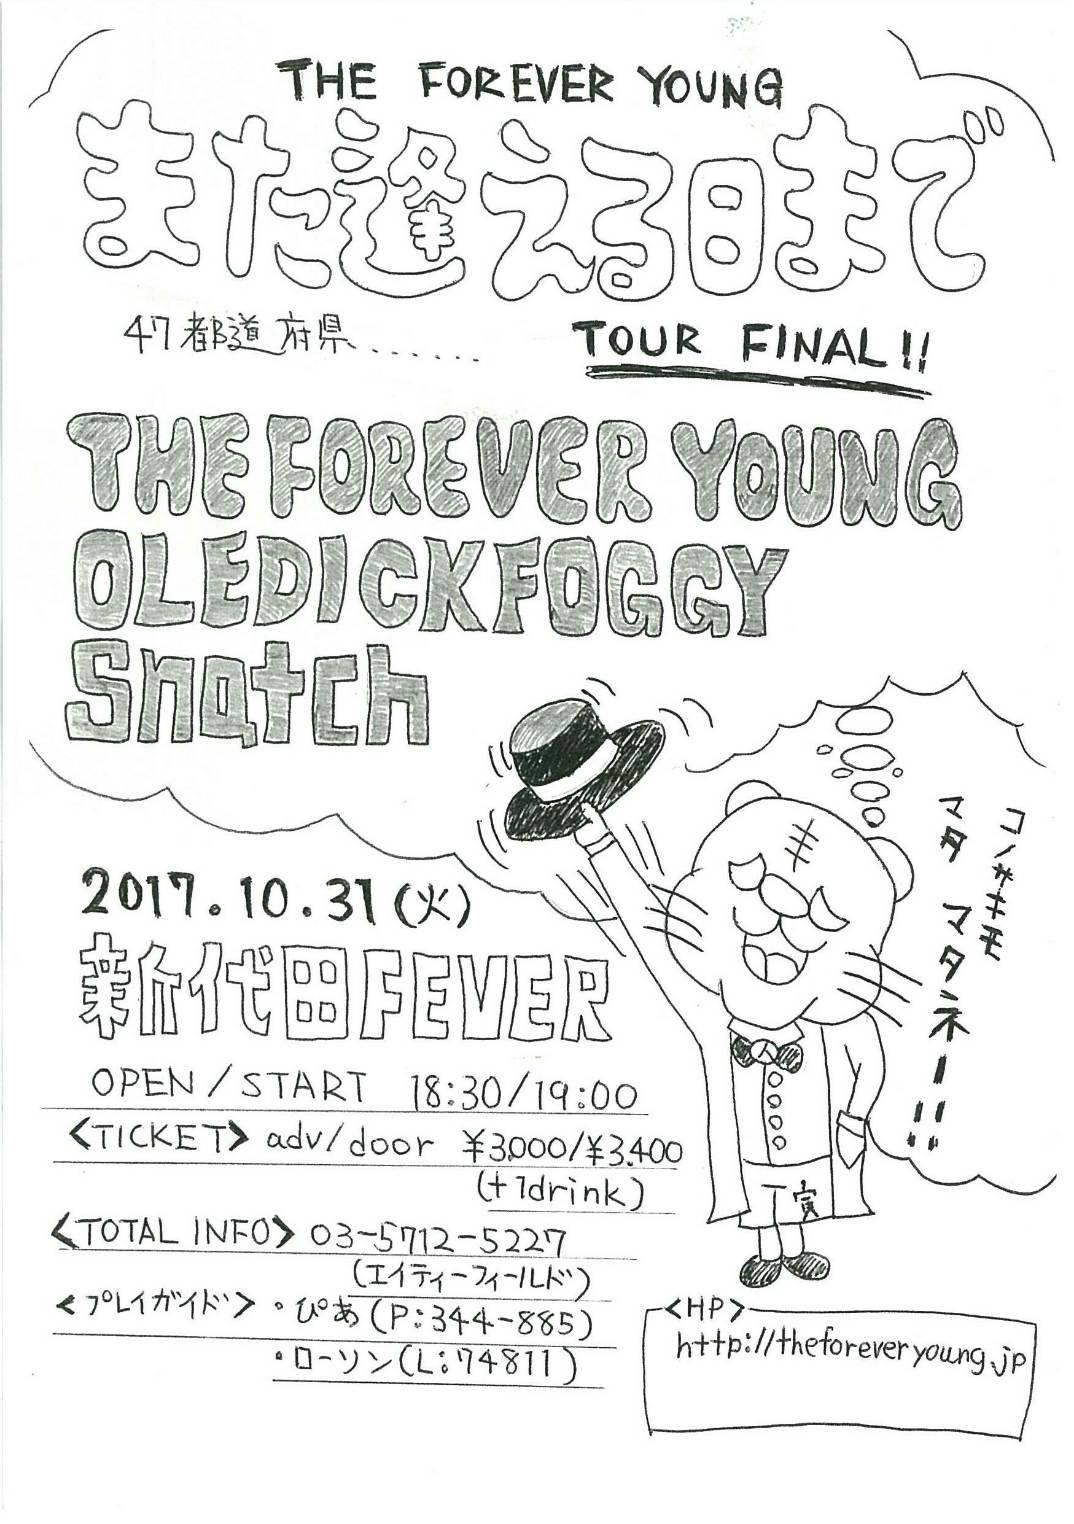 SUR INFORMATION.: THE FOREVER YOUNG”また逢える日までツアー”ファイナル詳細決定！